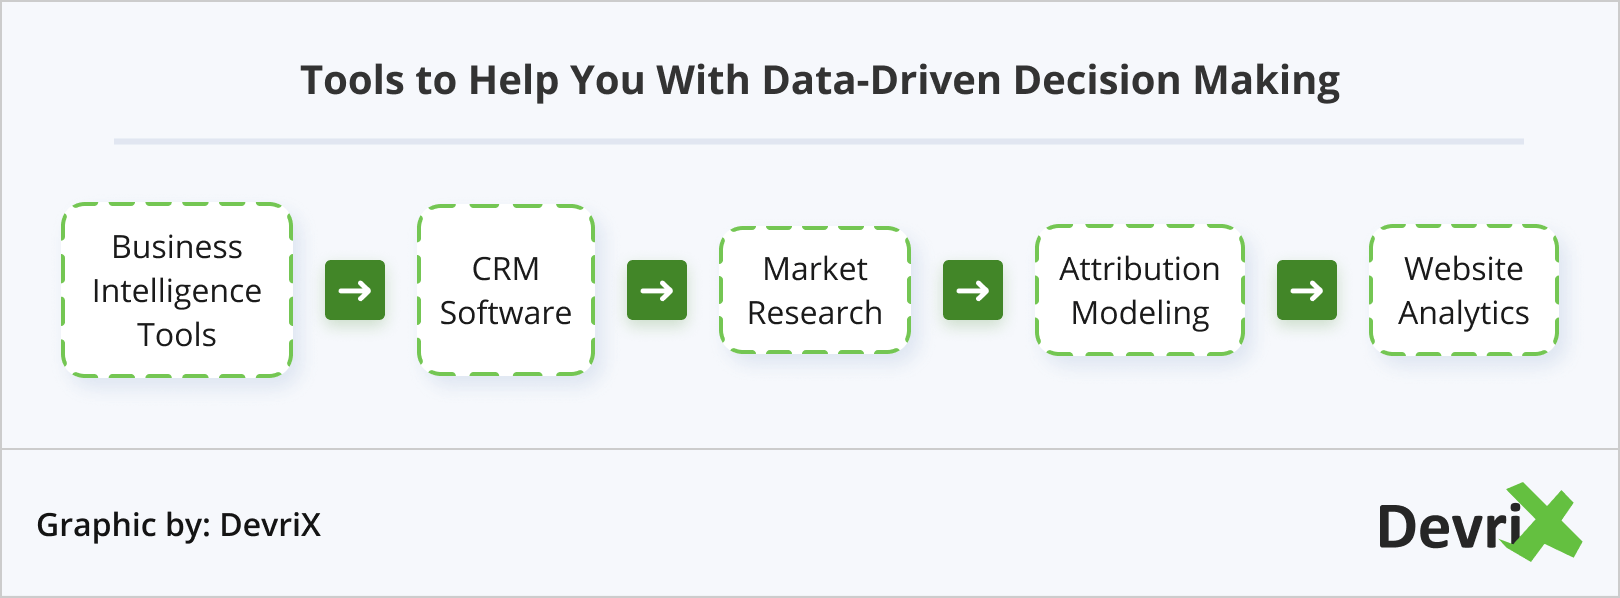 Tools to Help You With Data-Driven Decision Making